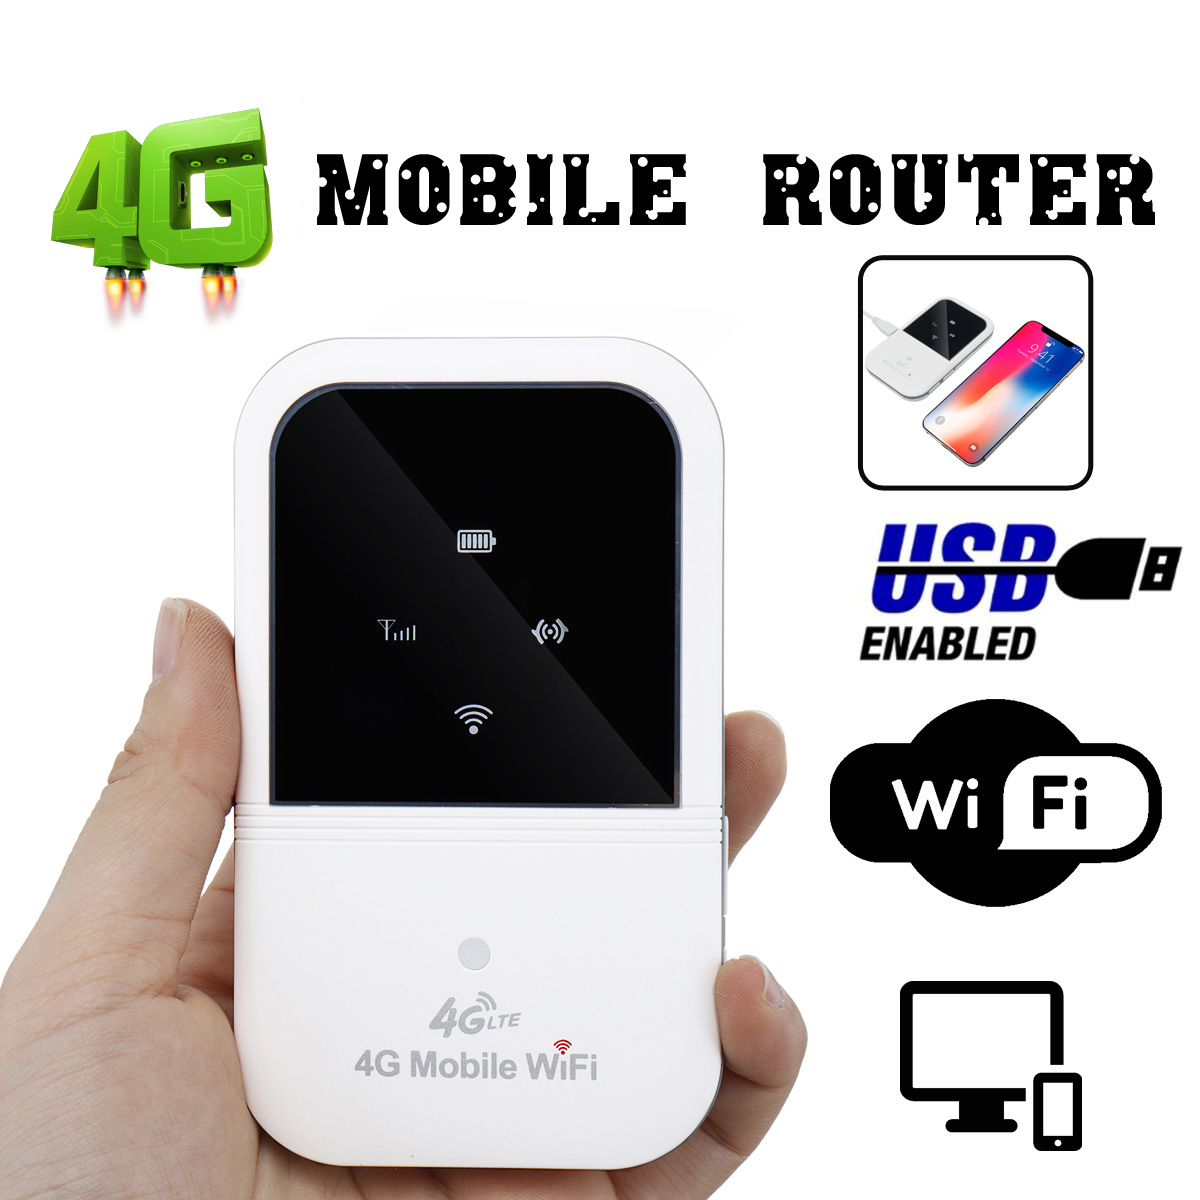 A800 4G Wireless Router Portable WiFi 802.11 b/g/n 4G 150Mbps Portable Router 4G Hotspot With SIM Slot Wireless Routers Repeater